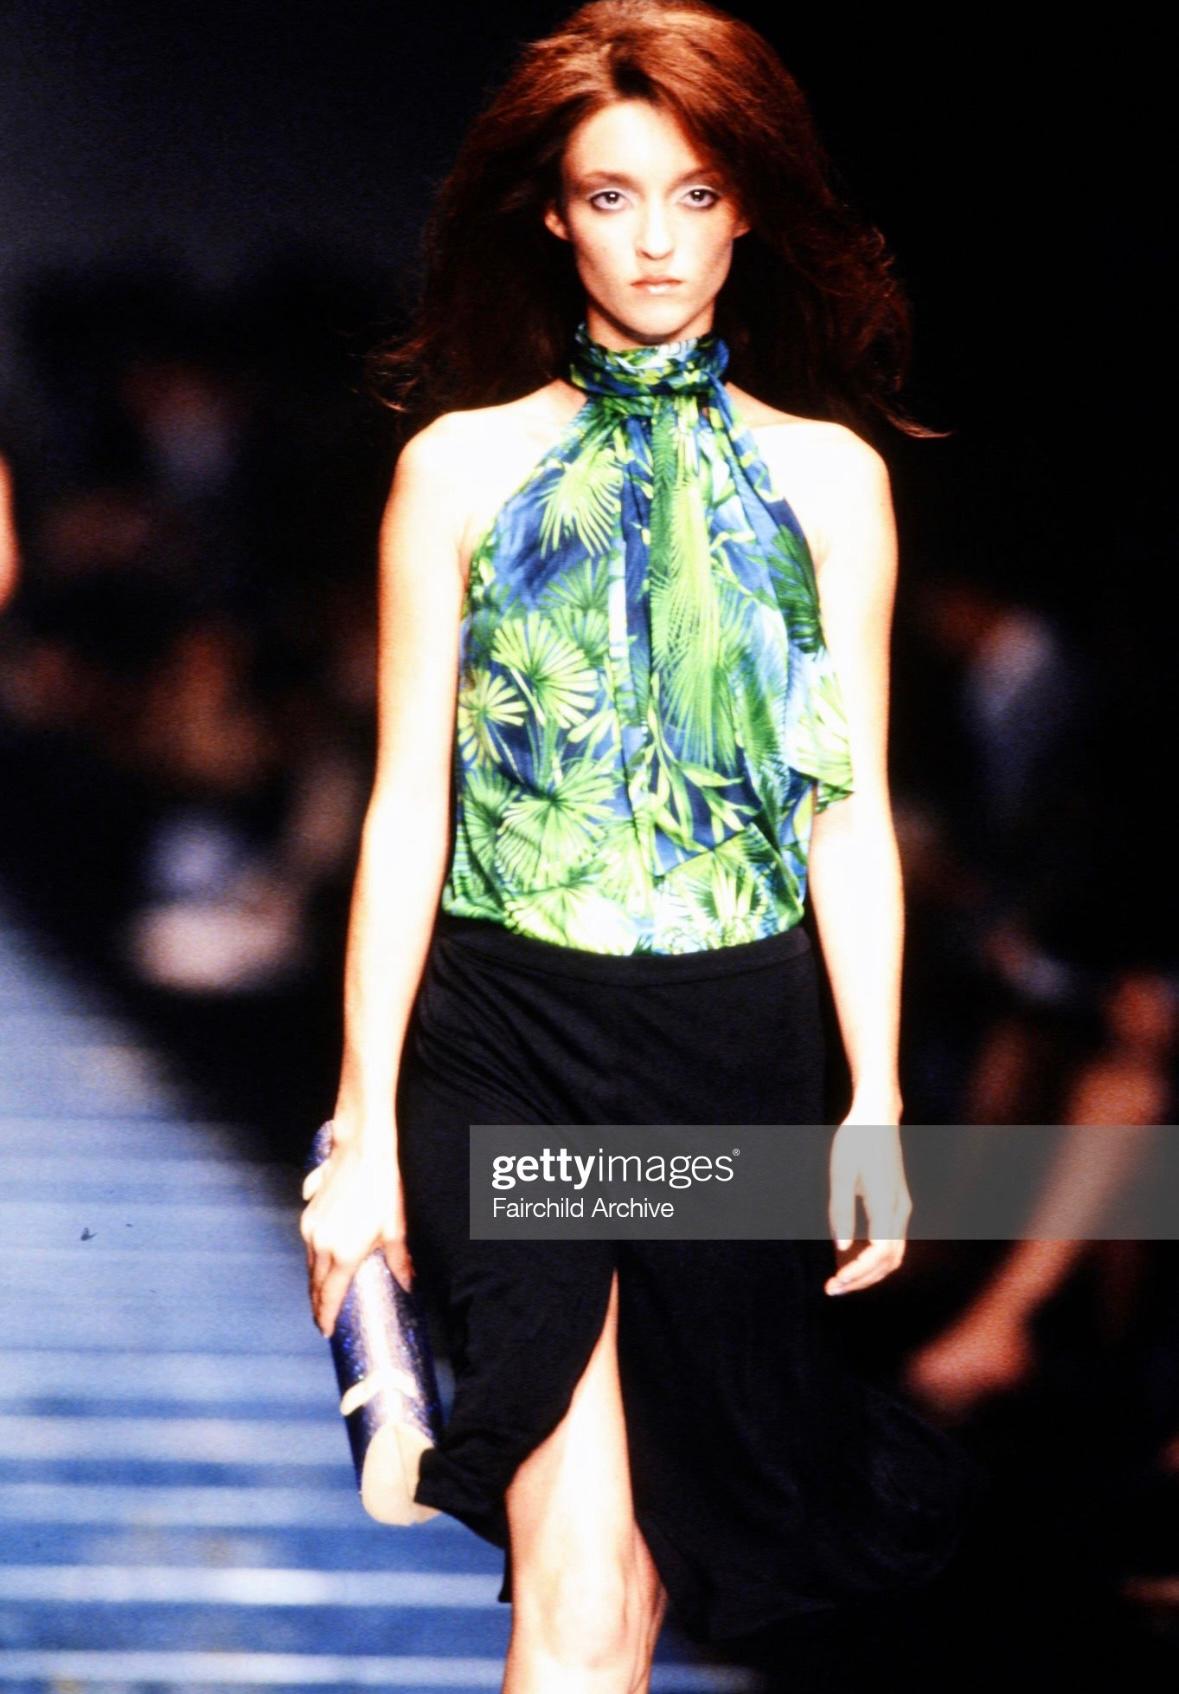 Presenting a fabulous tan suede purple rhinestone Gianni Versace convertible clutch, designed by Donatella Versace. Make a bold statement with this amazing Gianni Versace convertible clutch from the Spring/Summer 2000 collection. Seen on the runway